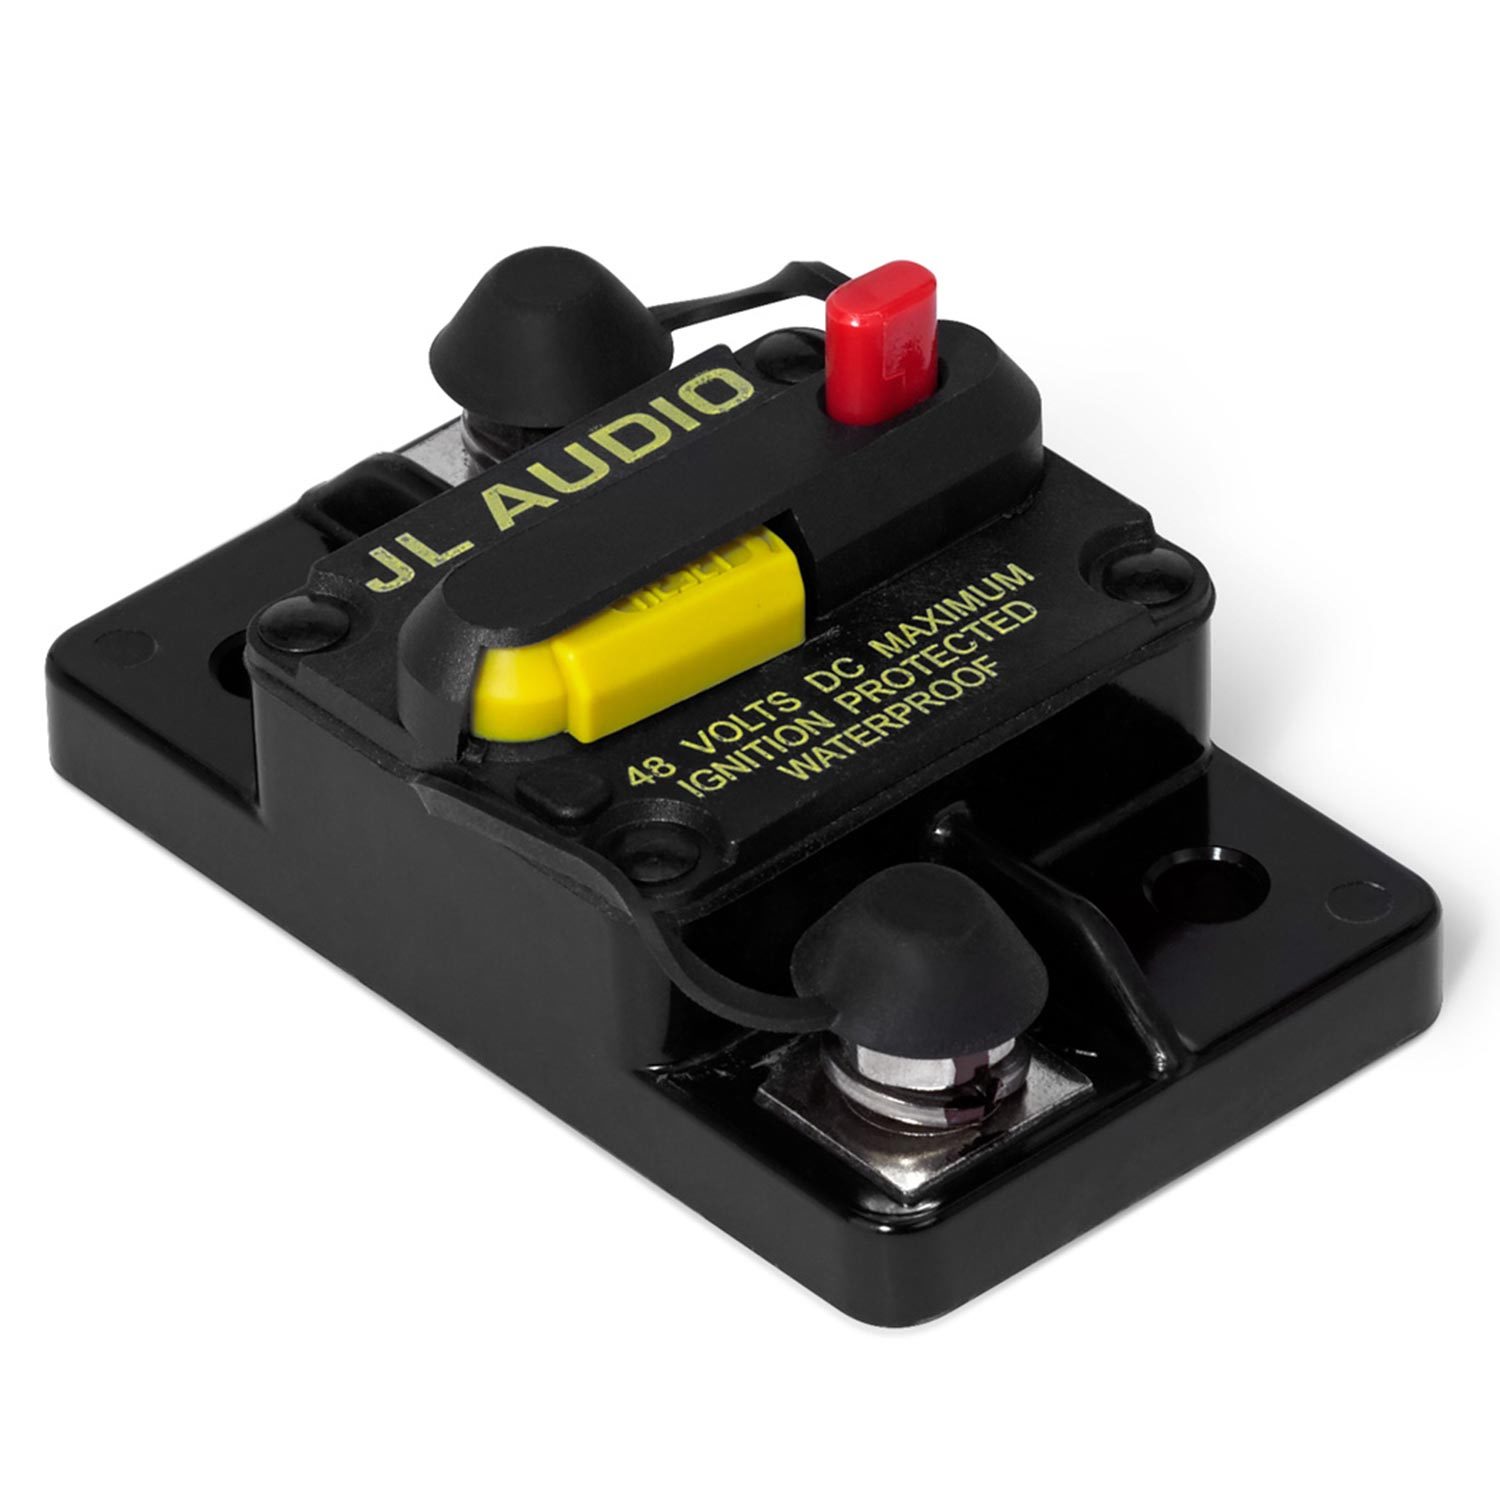 JL AUDIO XMD-MCB-80 Waterproof Ignition Protected 80A Circuit